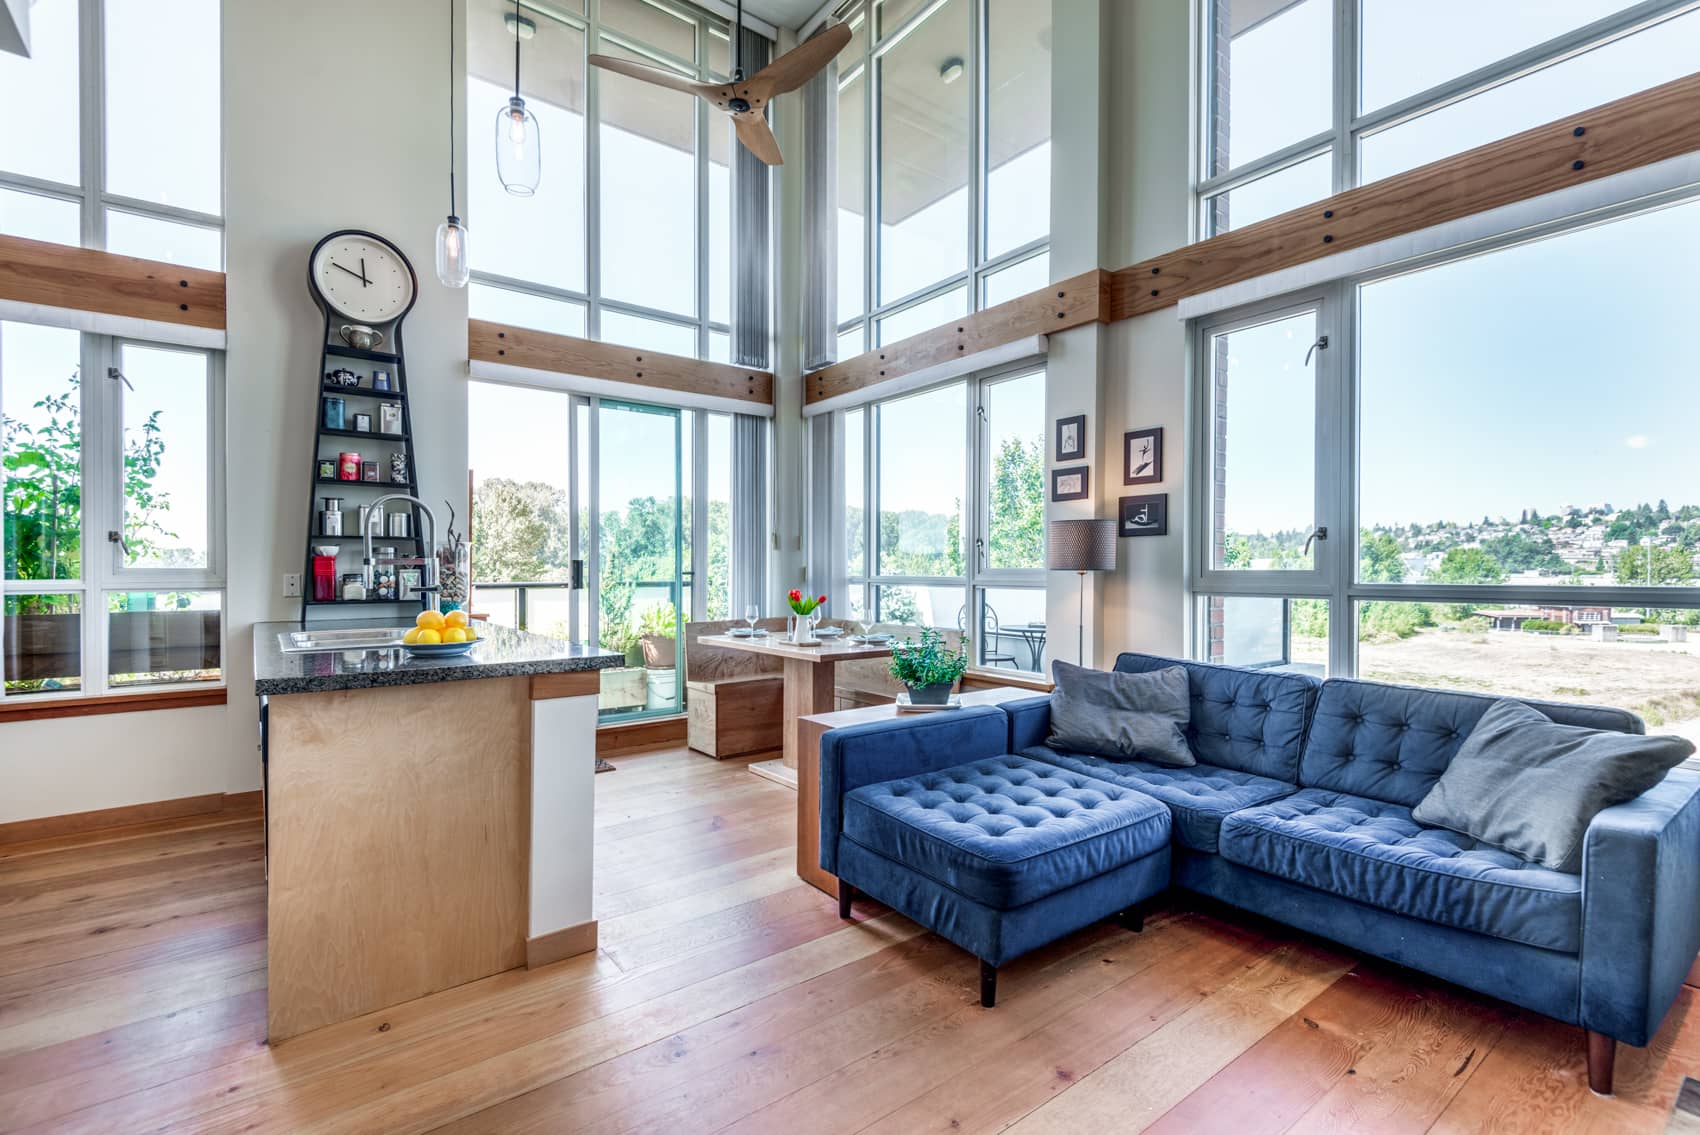 Beautiful 2 bedroom loft by the Quay